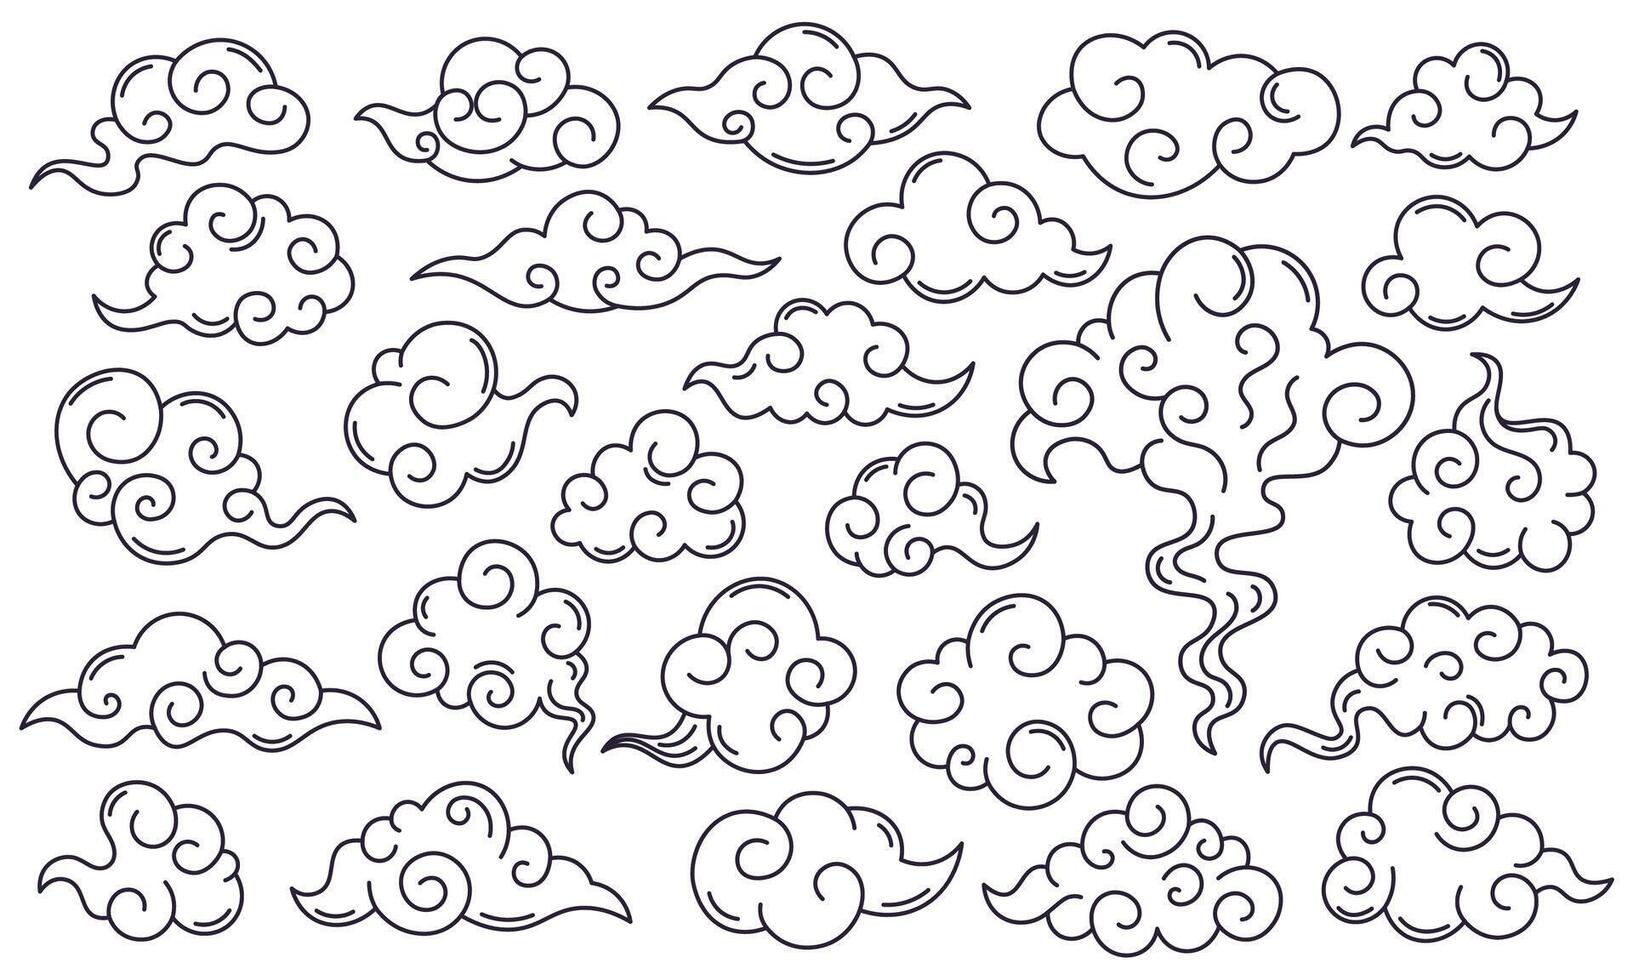 Asian decorative clouds. Oriental japan sky clouds, traditional chinese doodle decoration. Asian traditional clouds vector symbols set